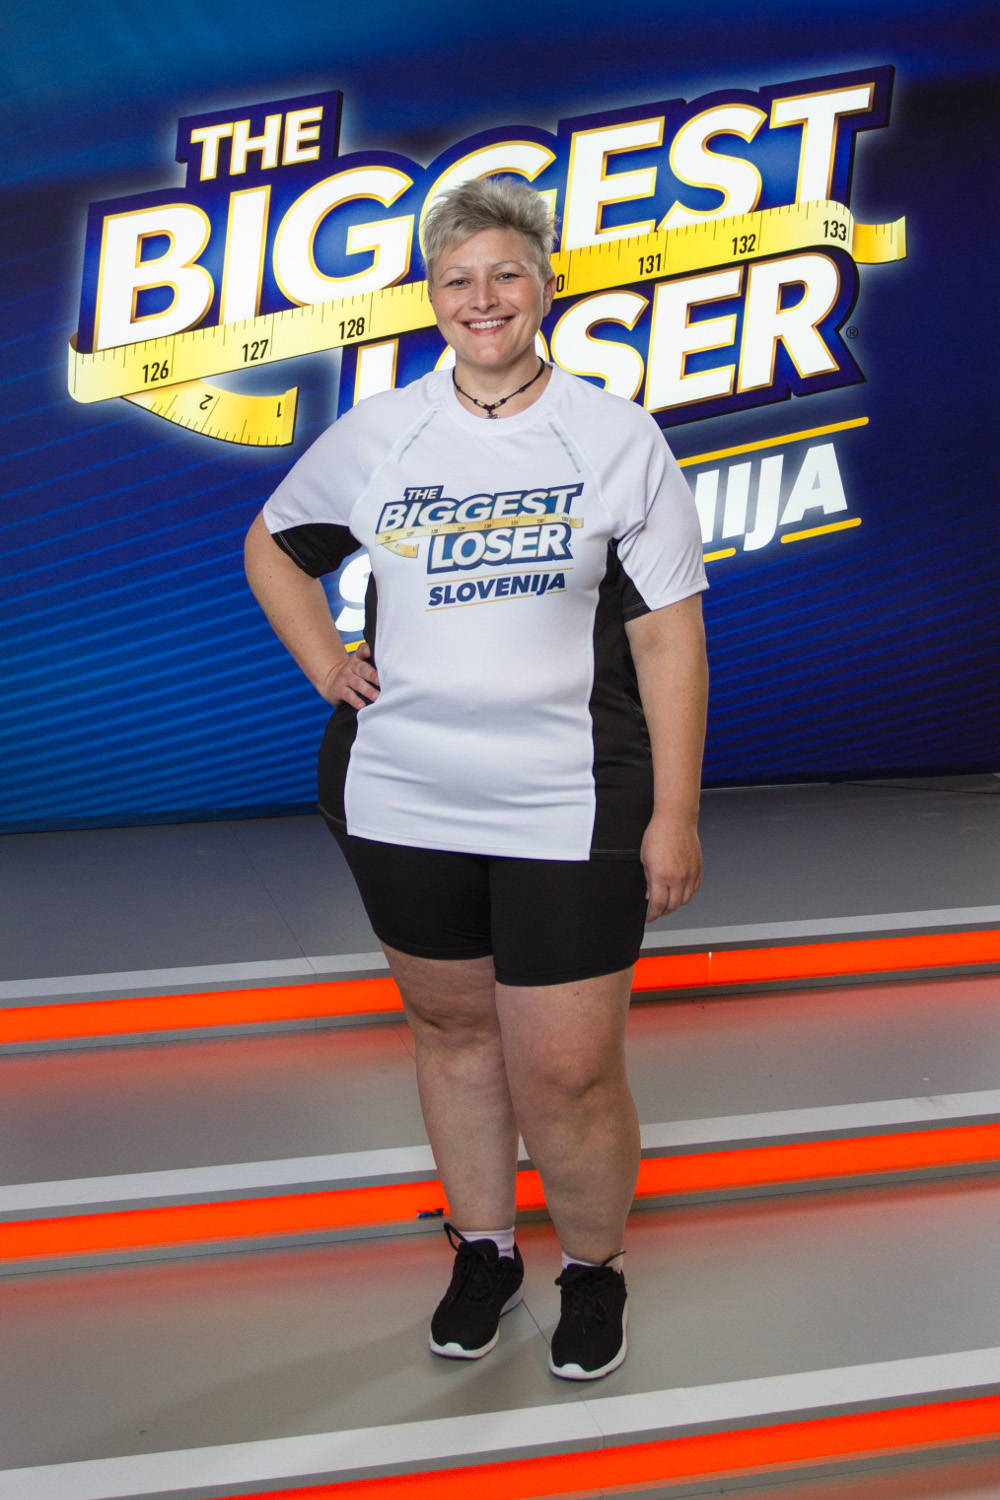 The Biggest Loser / Jeremy drops 199 pounds to win 'Biggest Loser' season 13 ... - Not enough ratings to calculate a score.